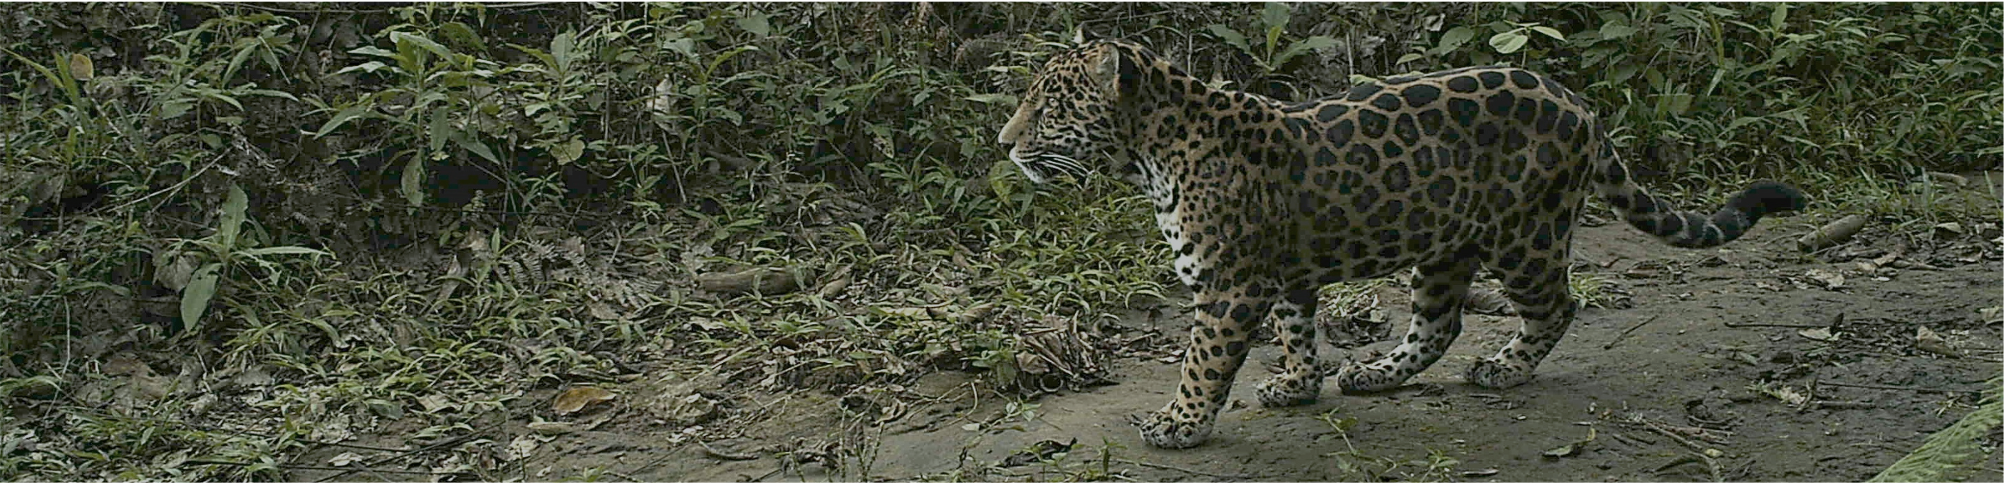 Image of jaguar (Panthera onca). Image credit: Arizona Center for Nature Conservation, with written permission.